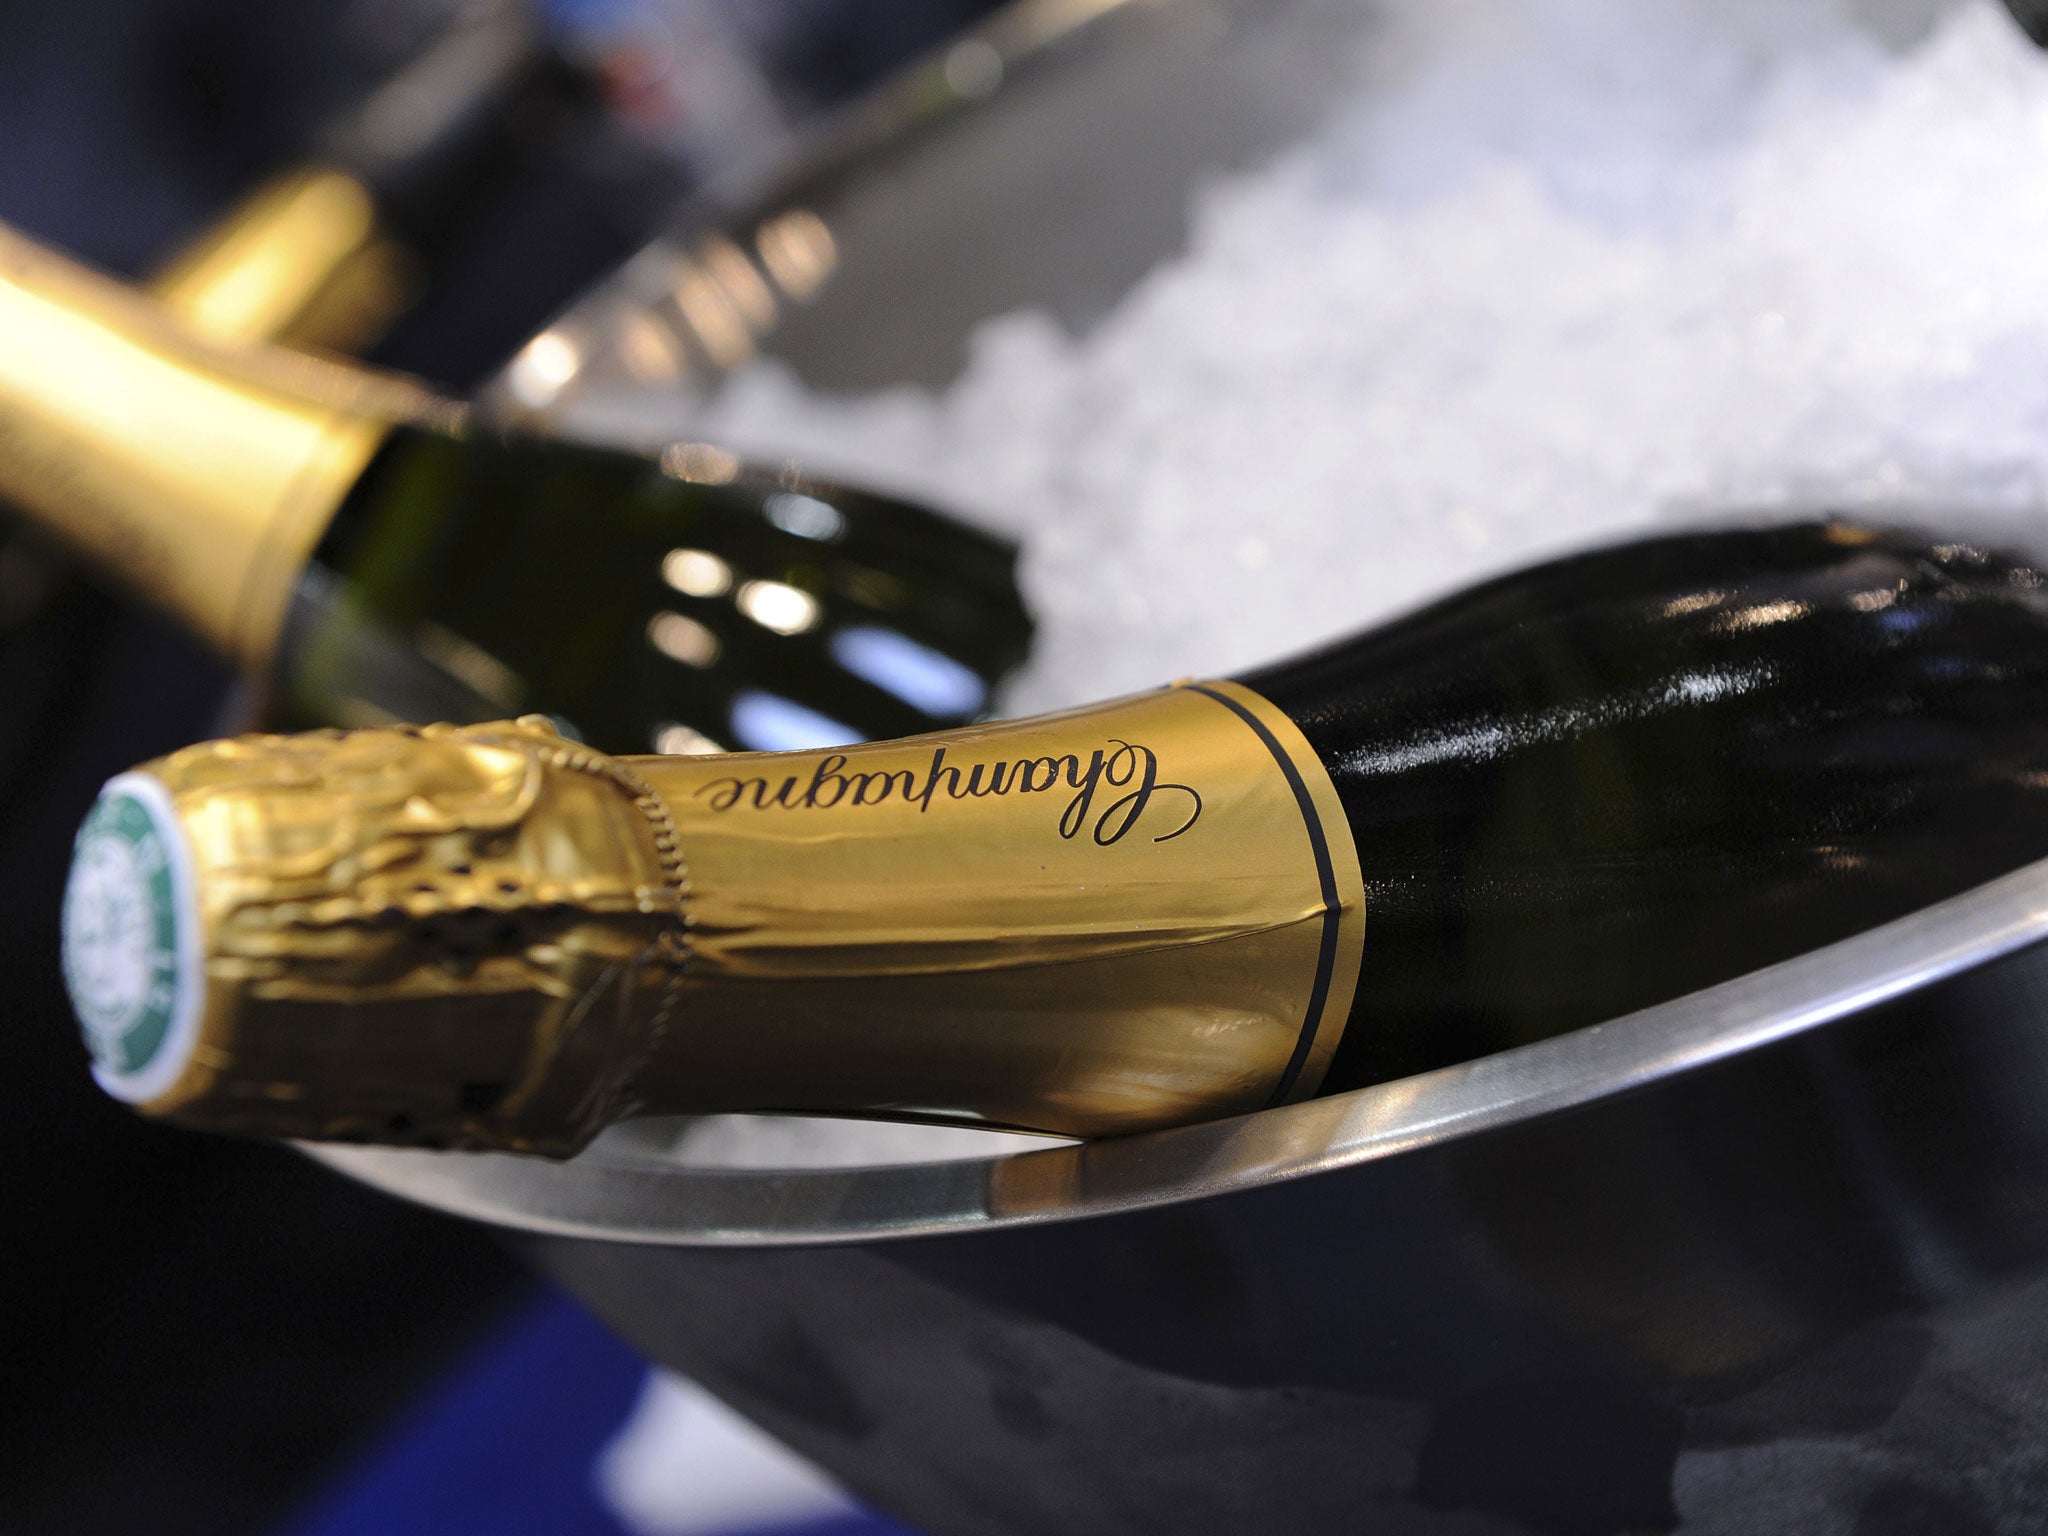 Sales of champagne – especially in Britain – have slumped for the second year in succession